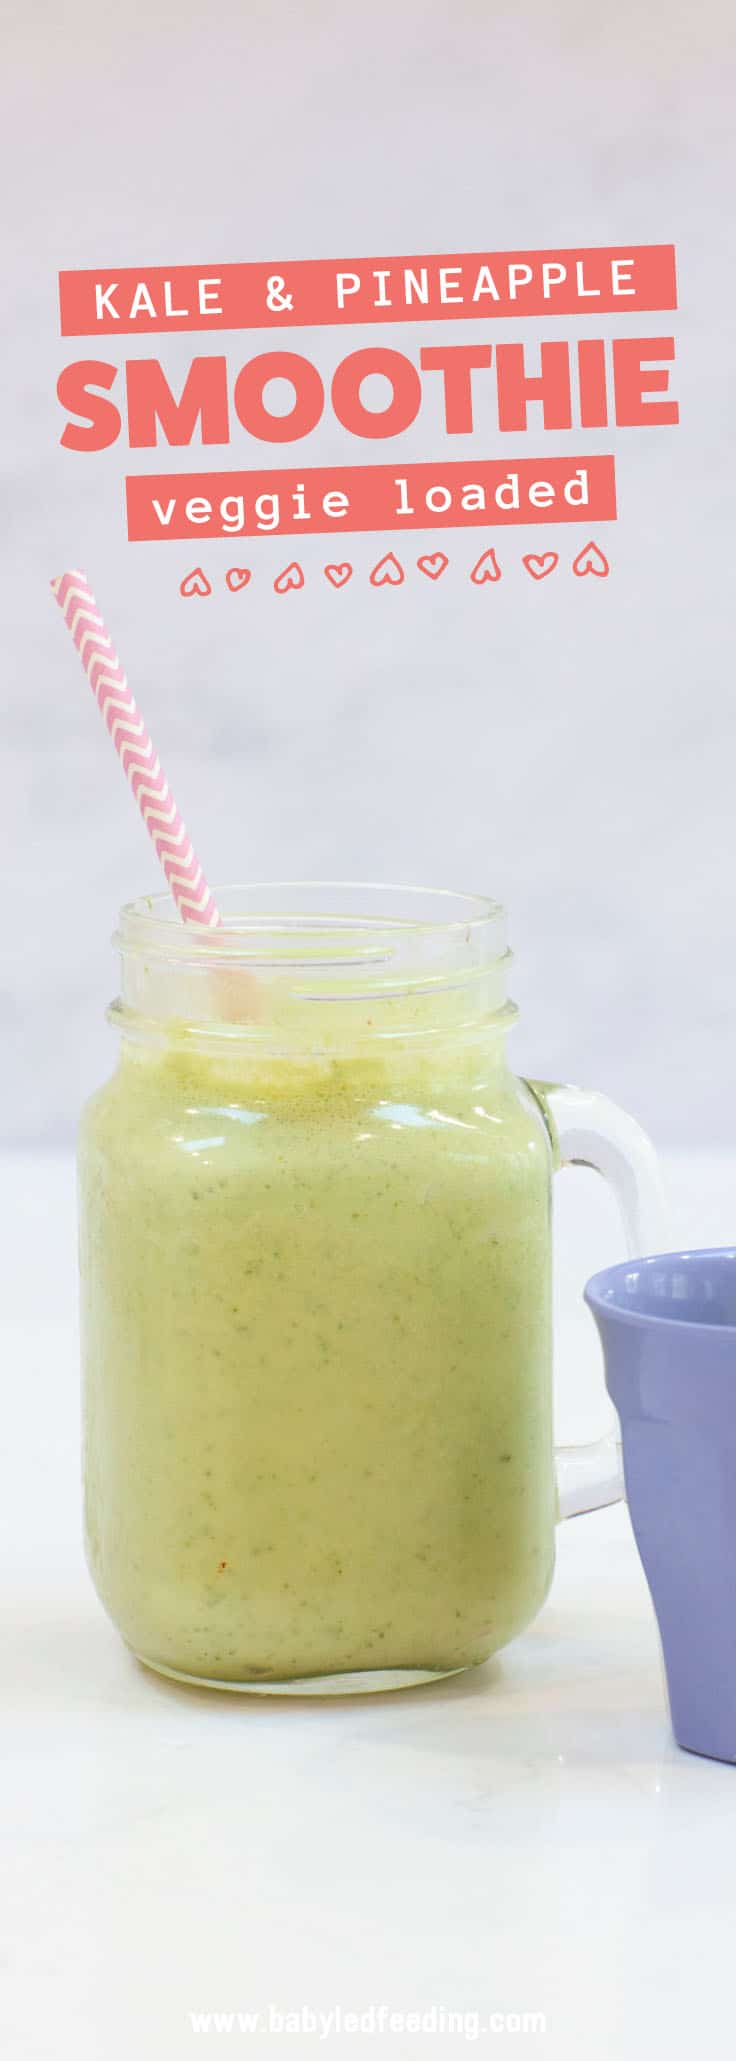 Kale and Pineapple Smoothie has just 5 ingredients and is full of healthy veggies, sweet pineapple, and tangy lime! This easy smoothie makes a quick breakfast or easy snack and is an excellent way to hide veggies from your picky eater! #smoothierecipe #pineapple #pickyeater #babyledweaning